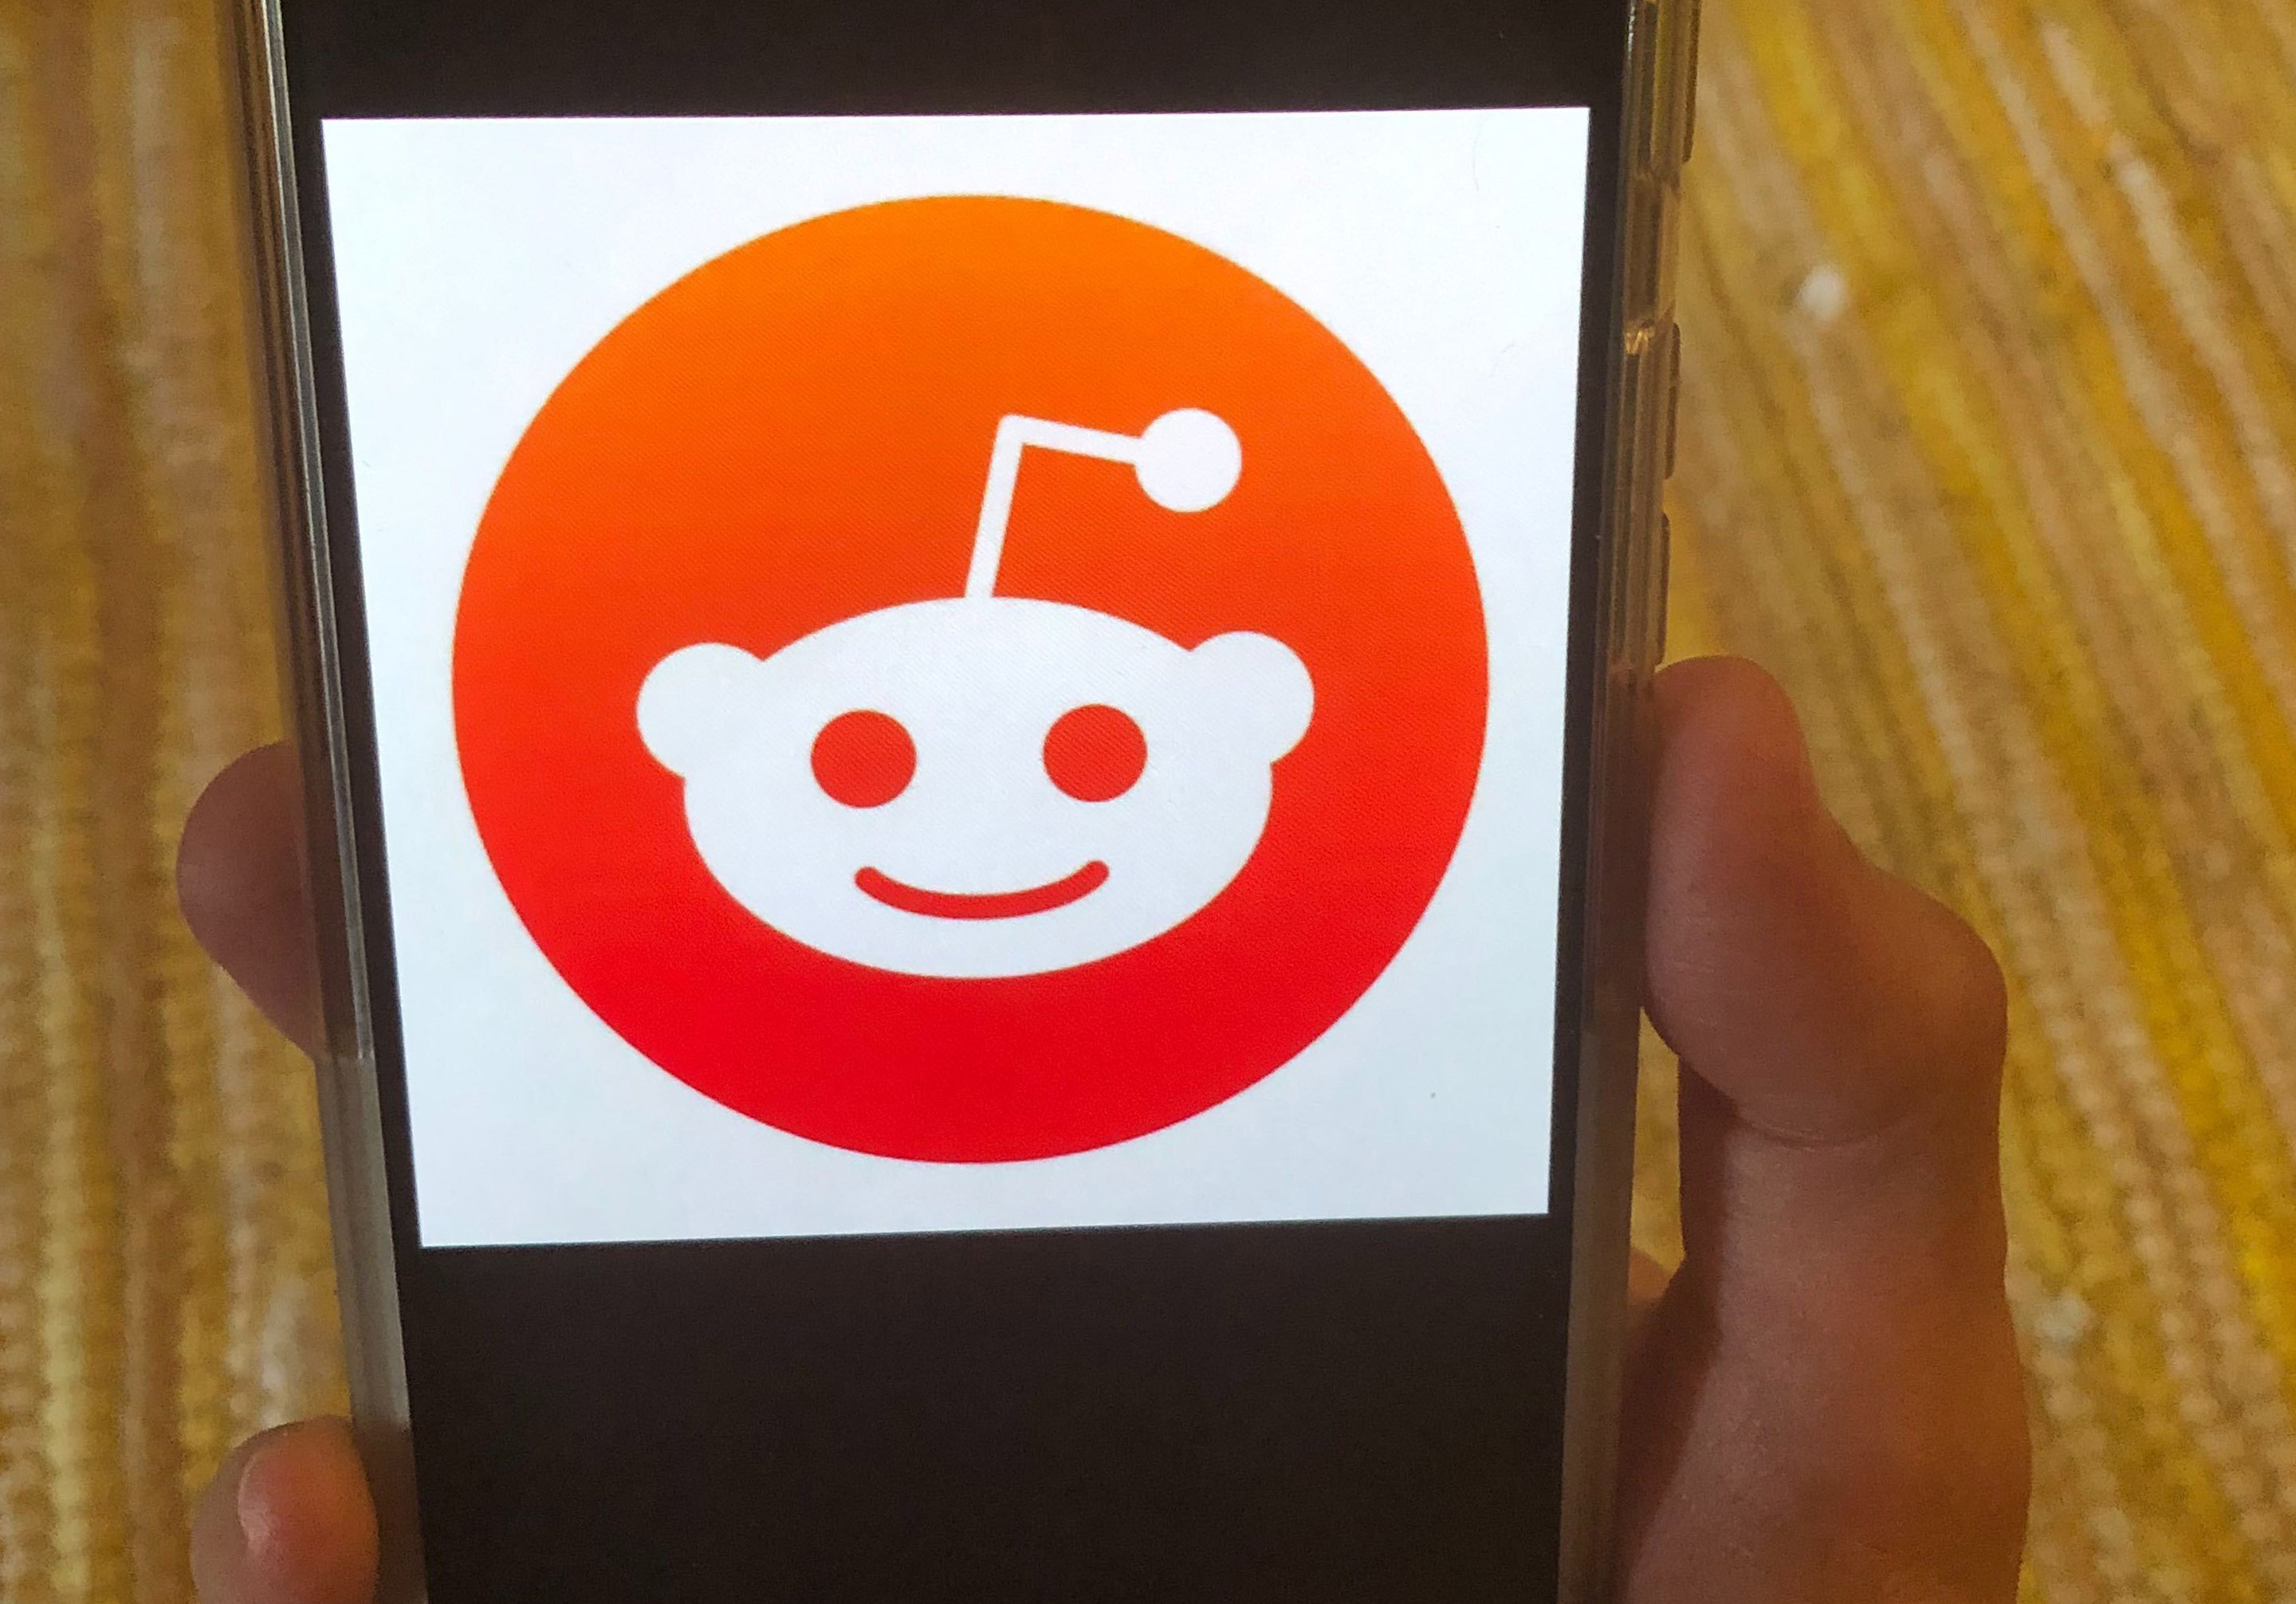 Reddit in crisis as prominent moderators protest API price increase